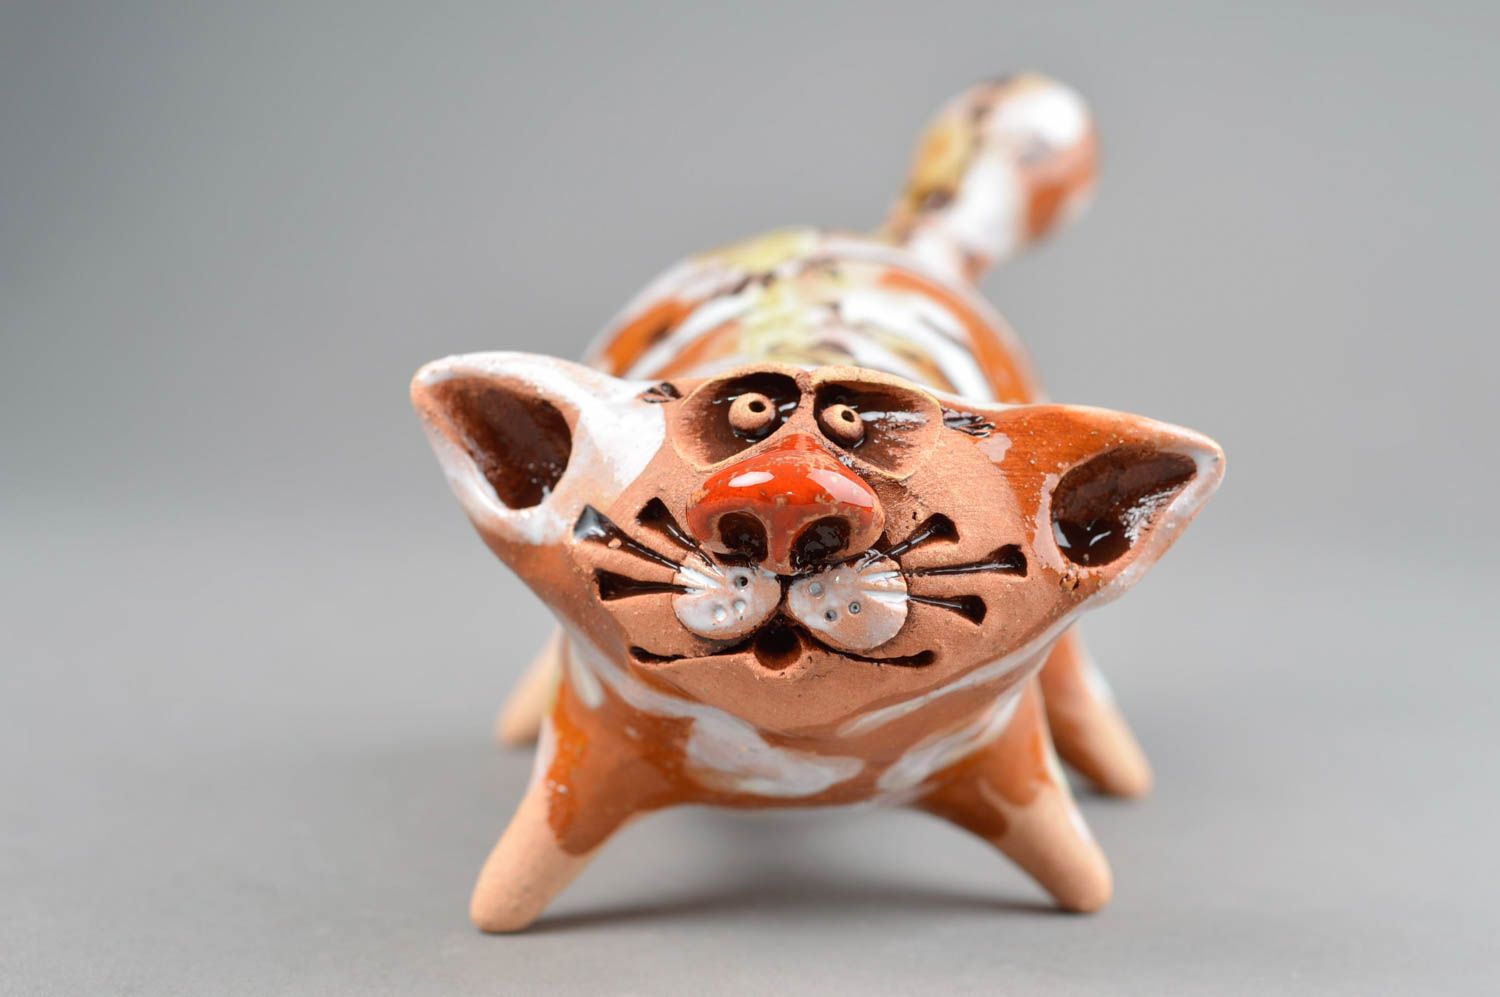 Cat figurines ceramic figurines homemade home decor gifts for cat lovers photo 3